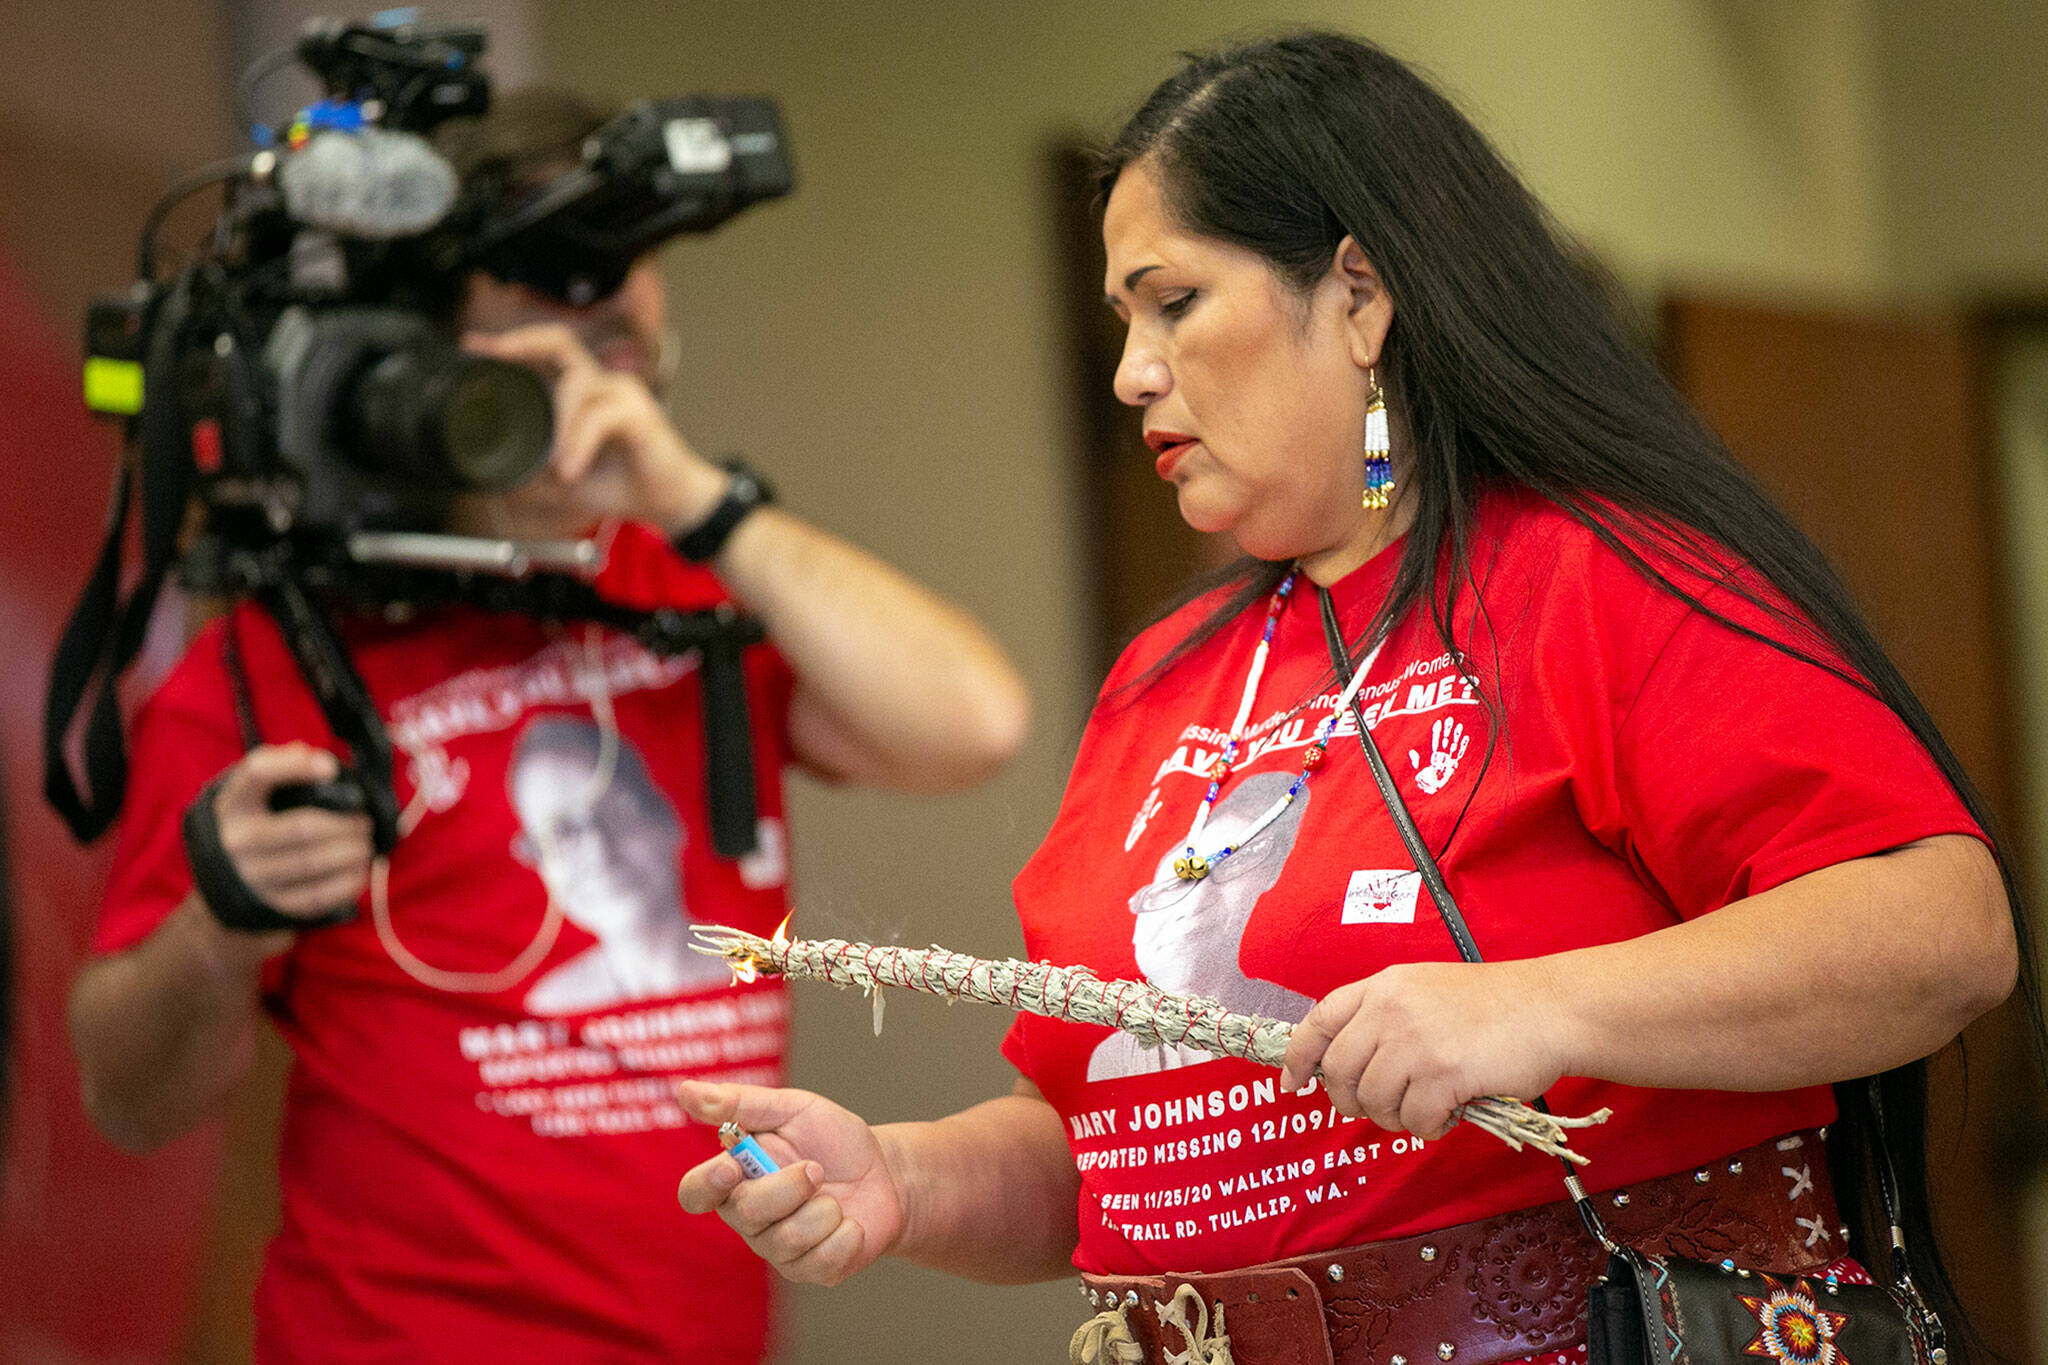 Event organizer Roxanne White lights a smudge stick as the family of Mary Ellen Johnson-Davis step up to the microphone to give a statement on Dec. 11, at Daybreak Star Indian Cultural Center in Seattle. (Ryan Berry / The Herald)